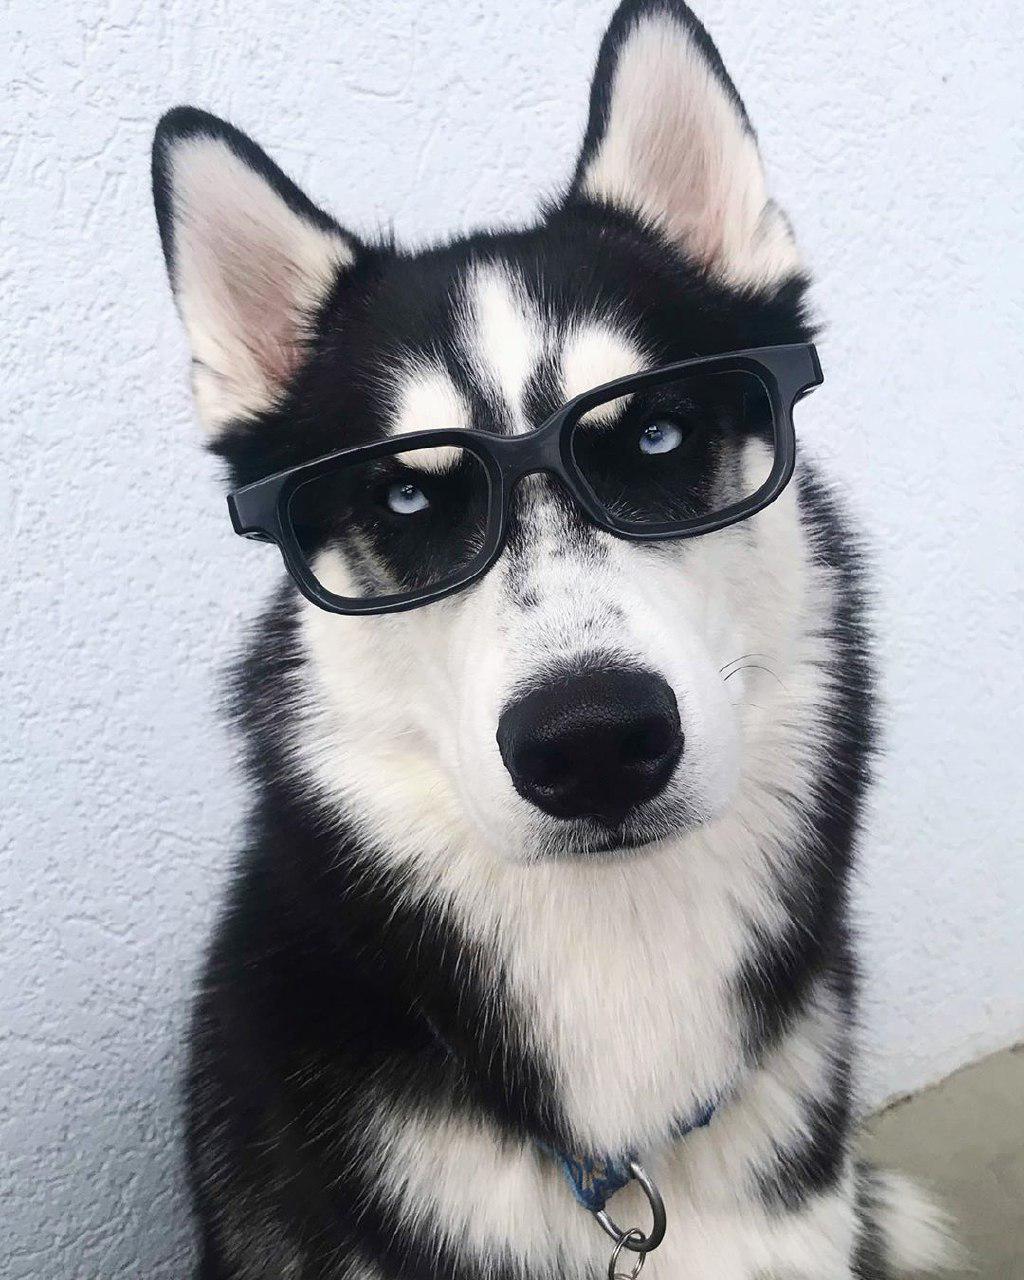 A Siberian Husky wearing glasses while sitting on the floor